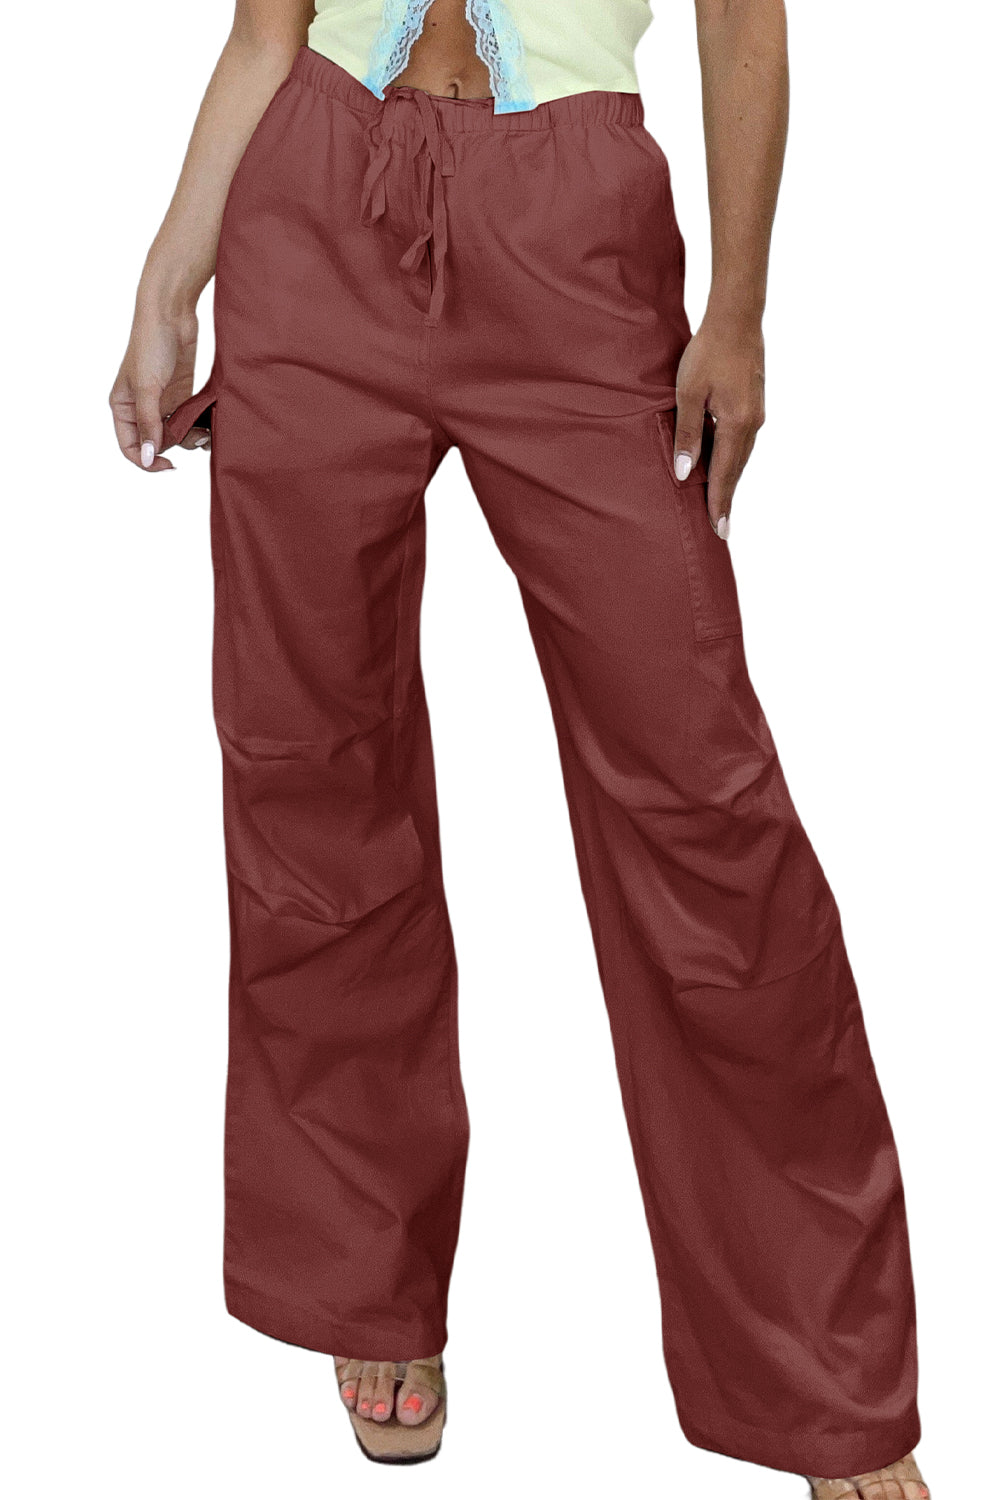 Mineral Red Solid Color Drawstring Waist Wide Leg Cargo Pants - Dixie Hike & Style